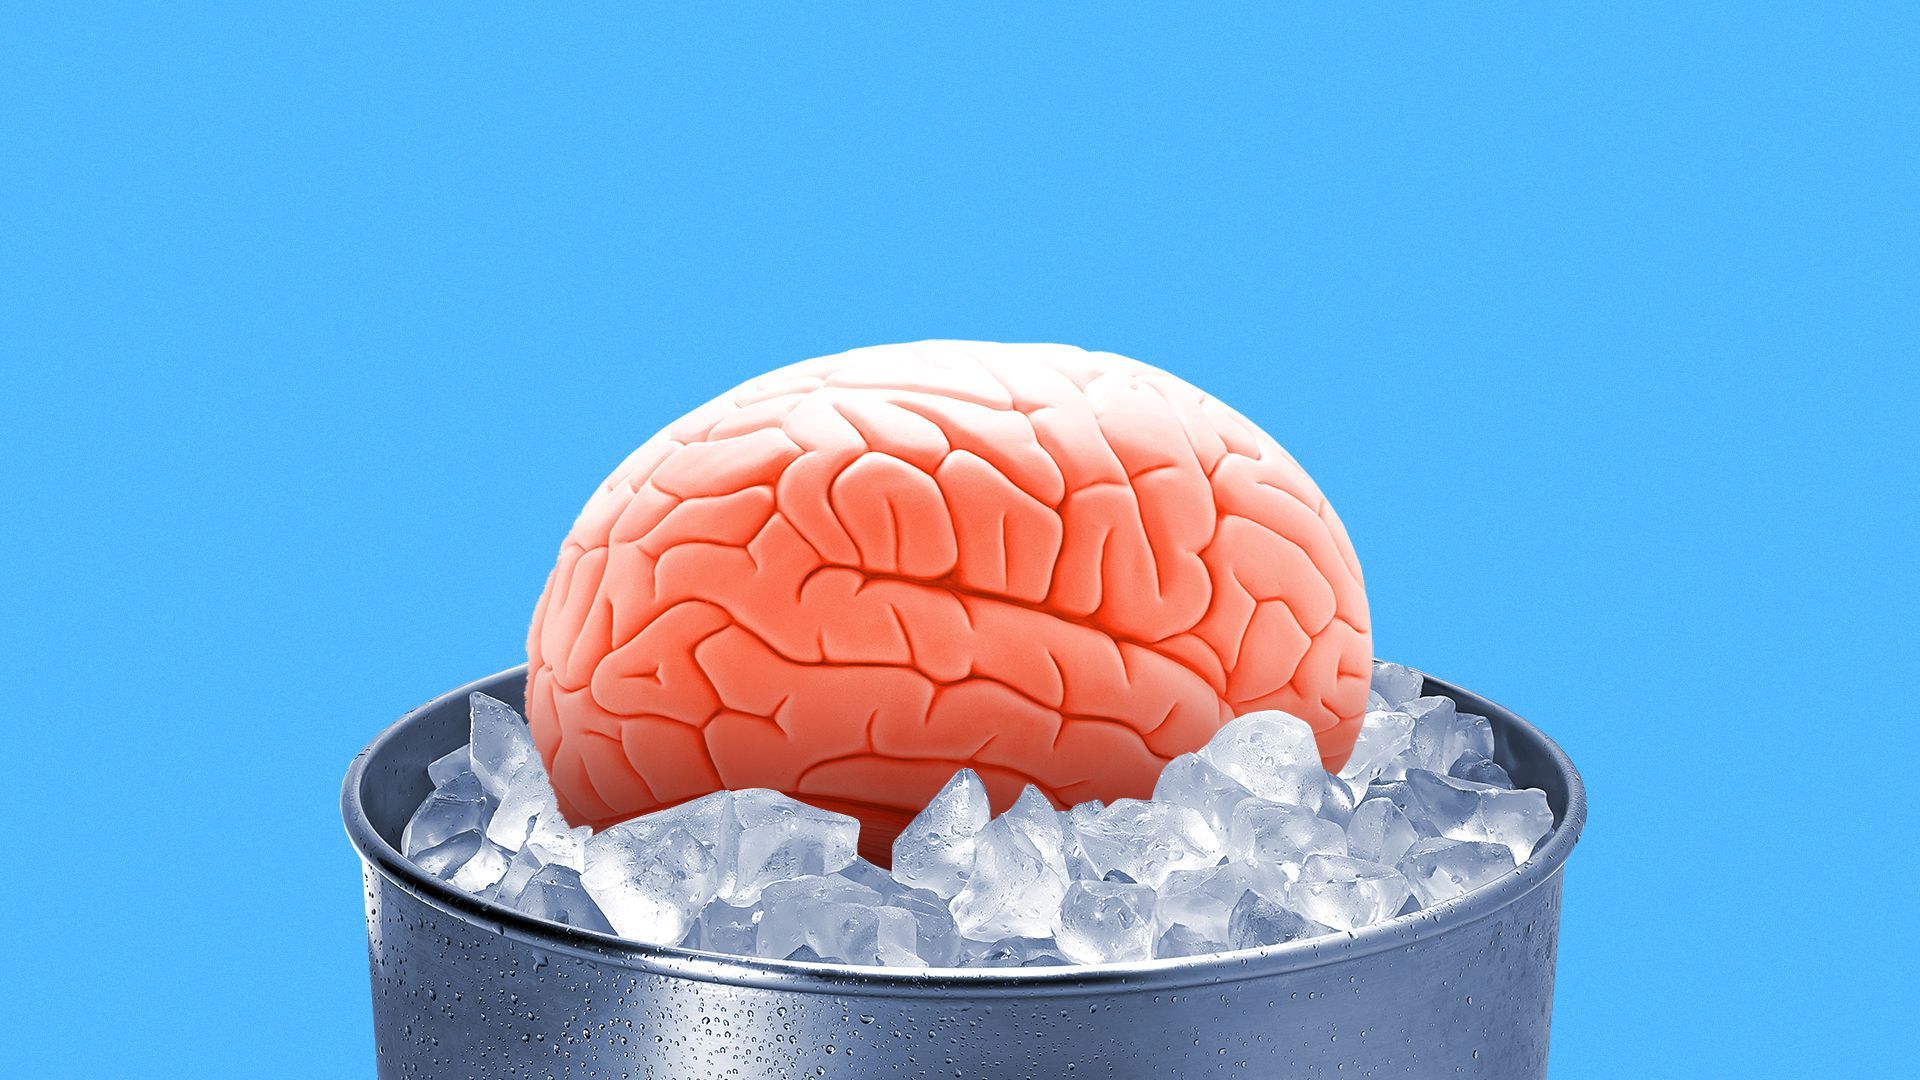 Illustration of a brain in an ice bucket